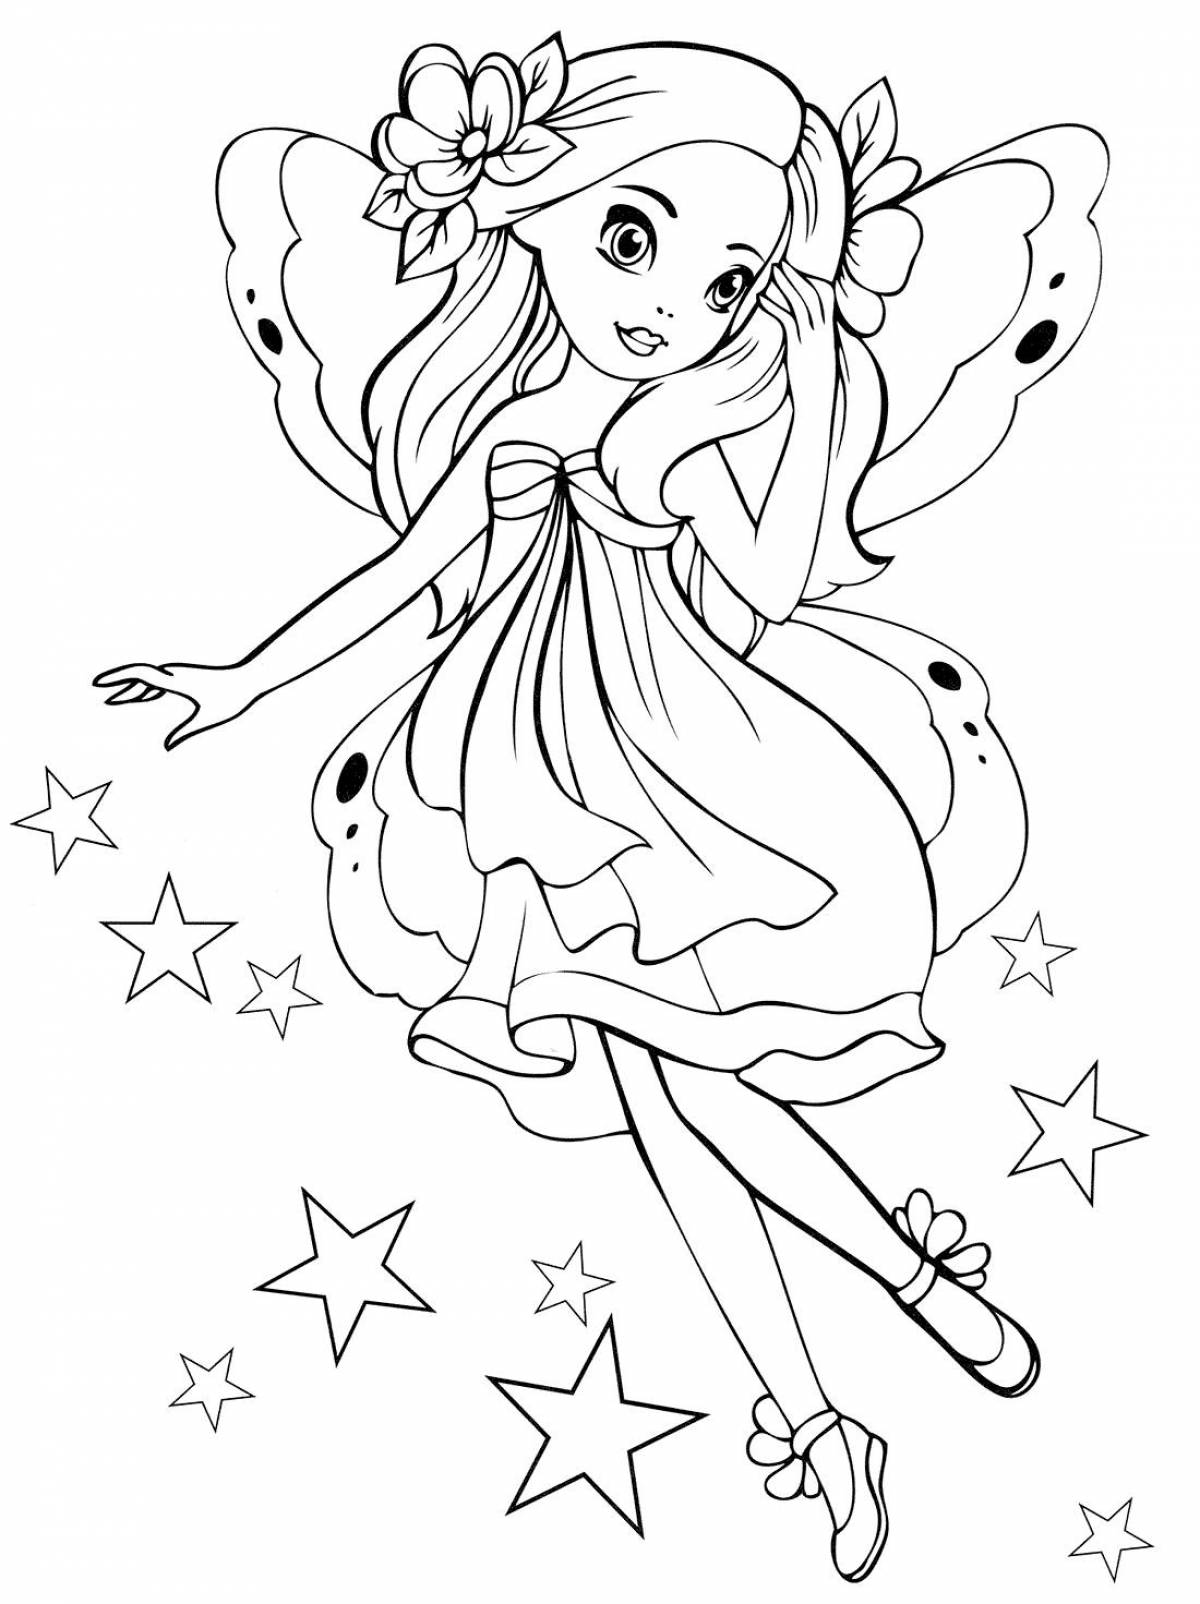 Photo Coloring pages for girls 8, 9, 10 years old